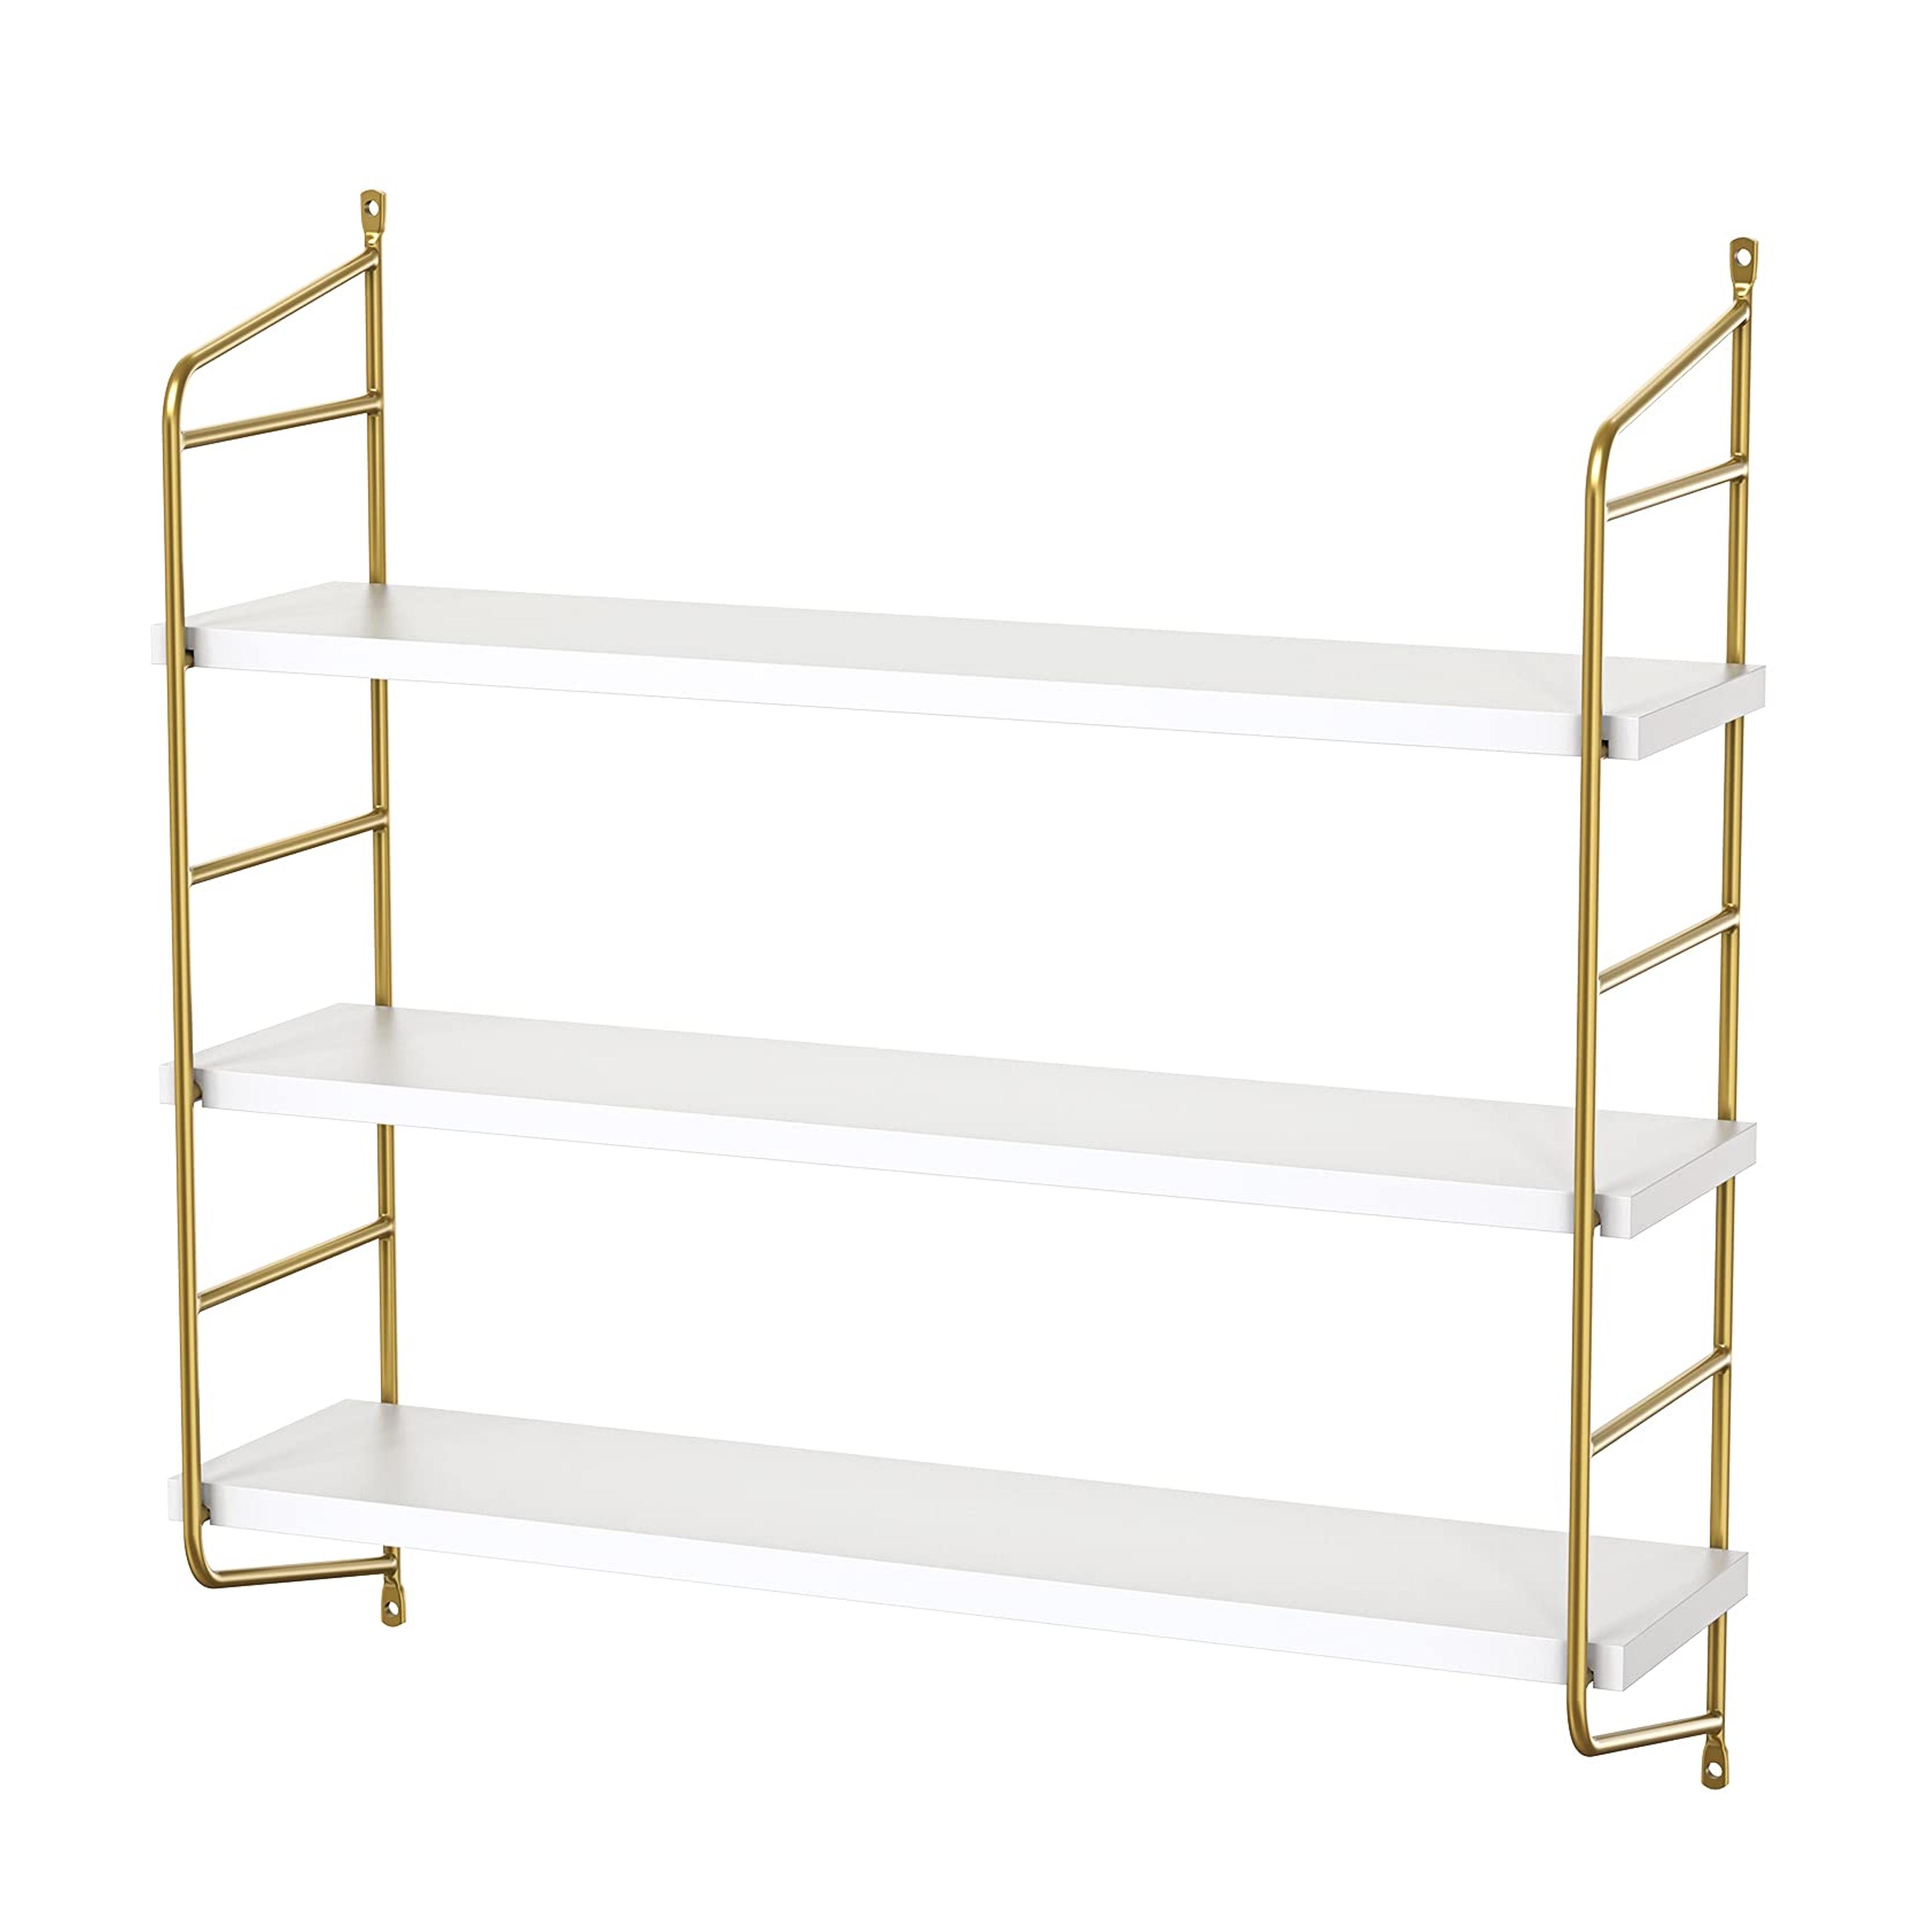 AMADA HOMEFURNISHING Floating Shelves Wall Mounted, Gold Wall Shelves for Living Room, Bedroom, Bathroom, Kitchen, 3 Tier Bookshelf 24 Inch White and Gold - AMFS15